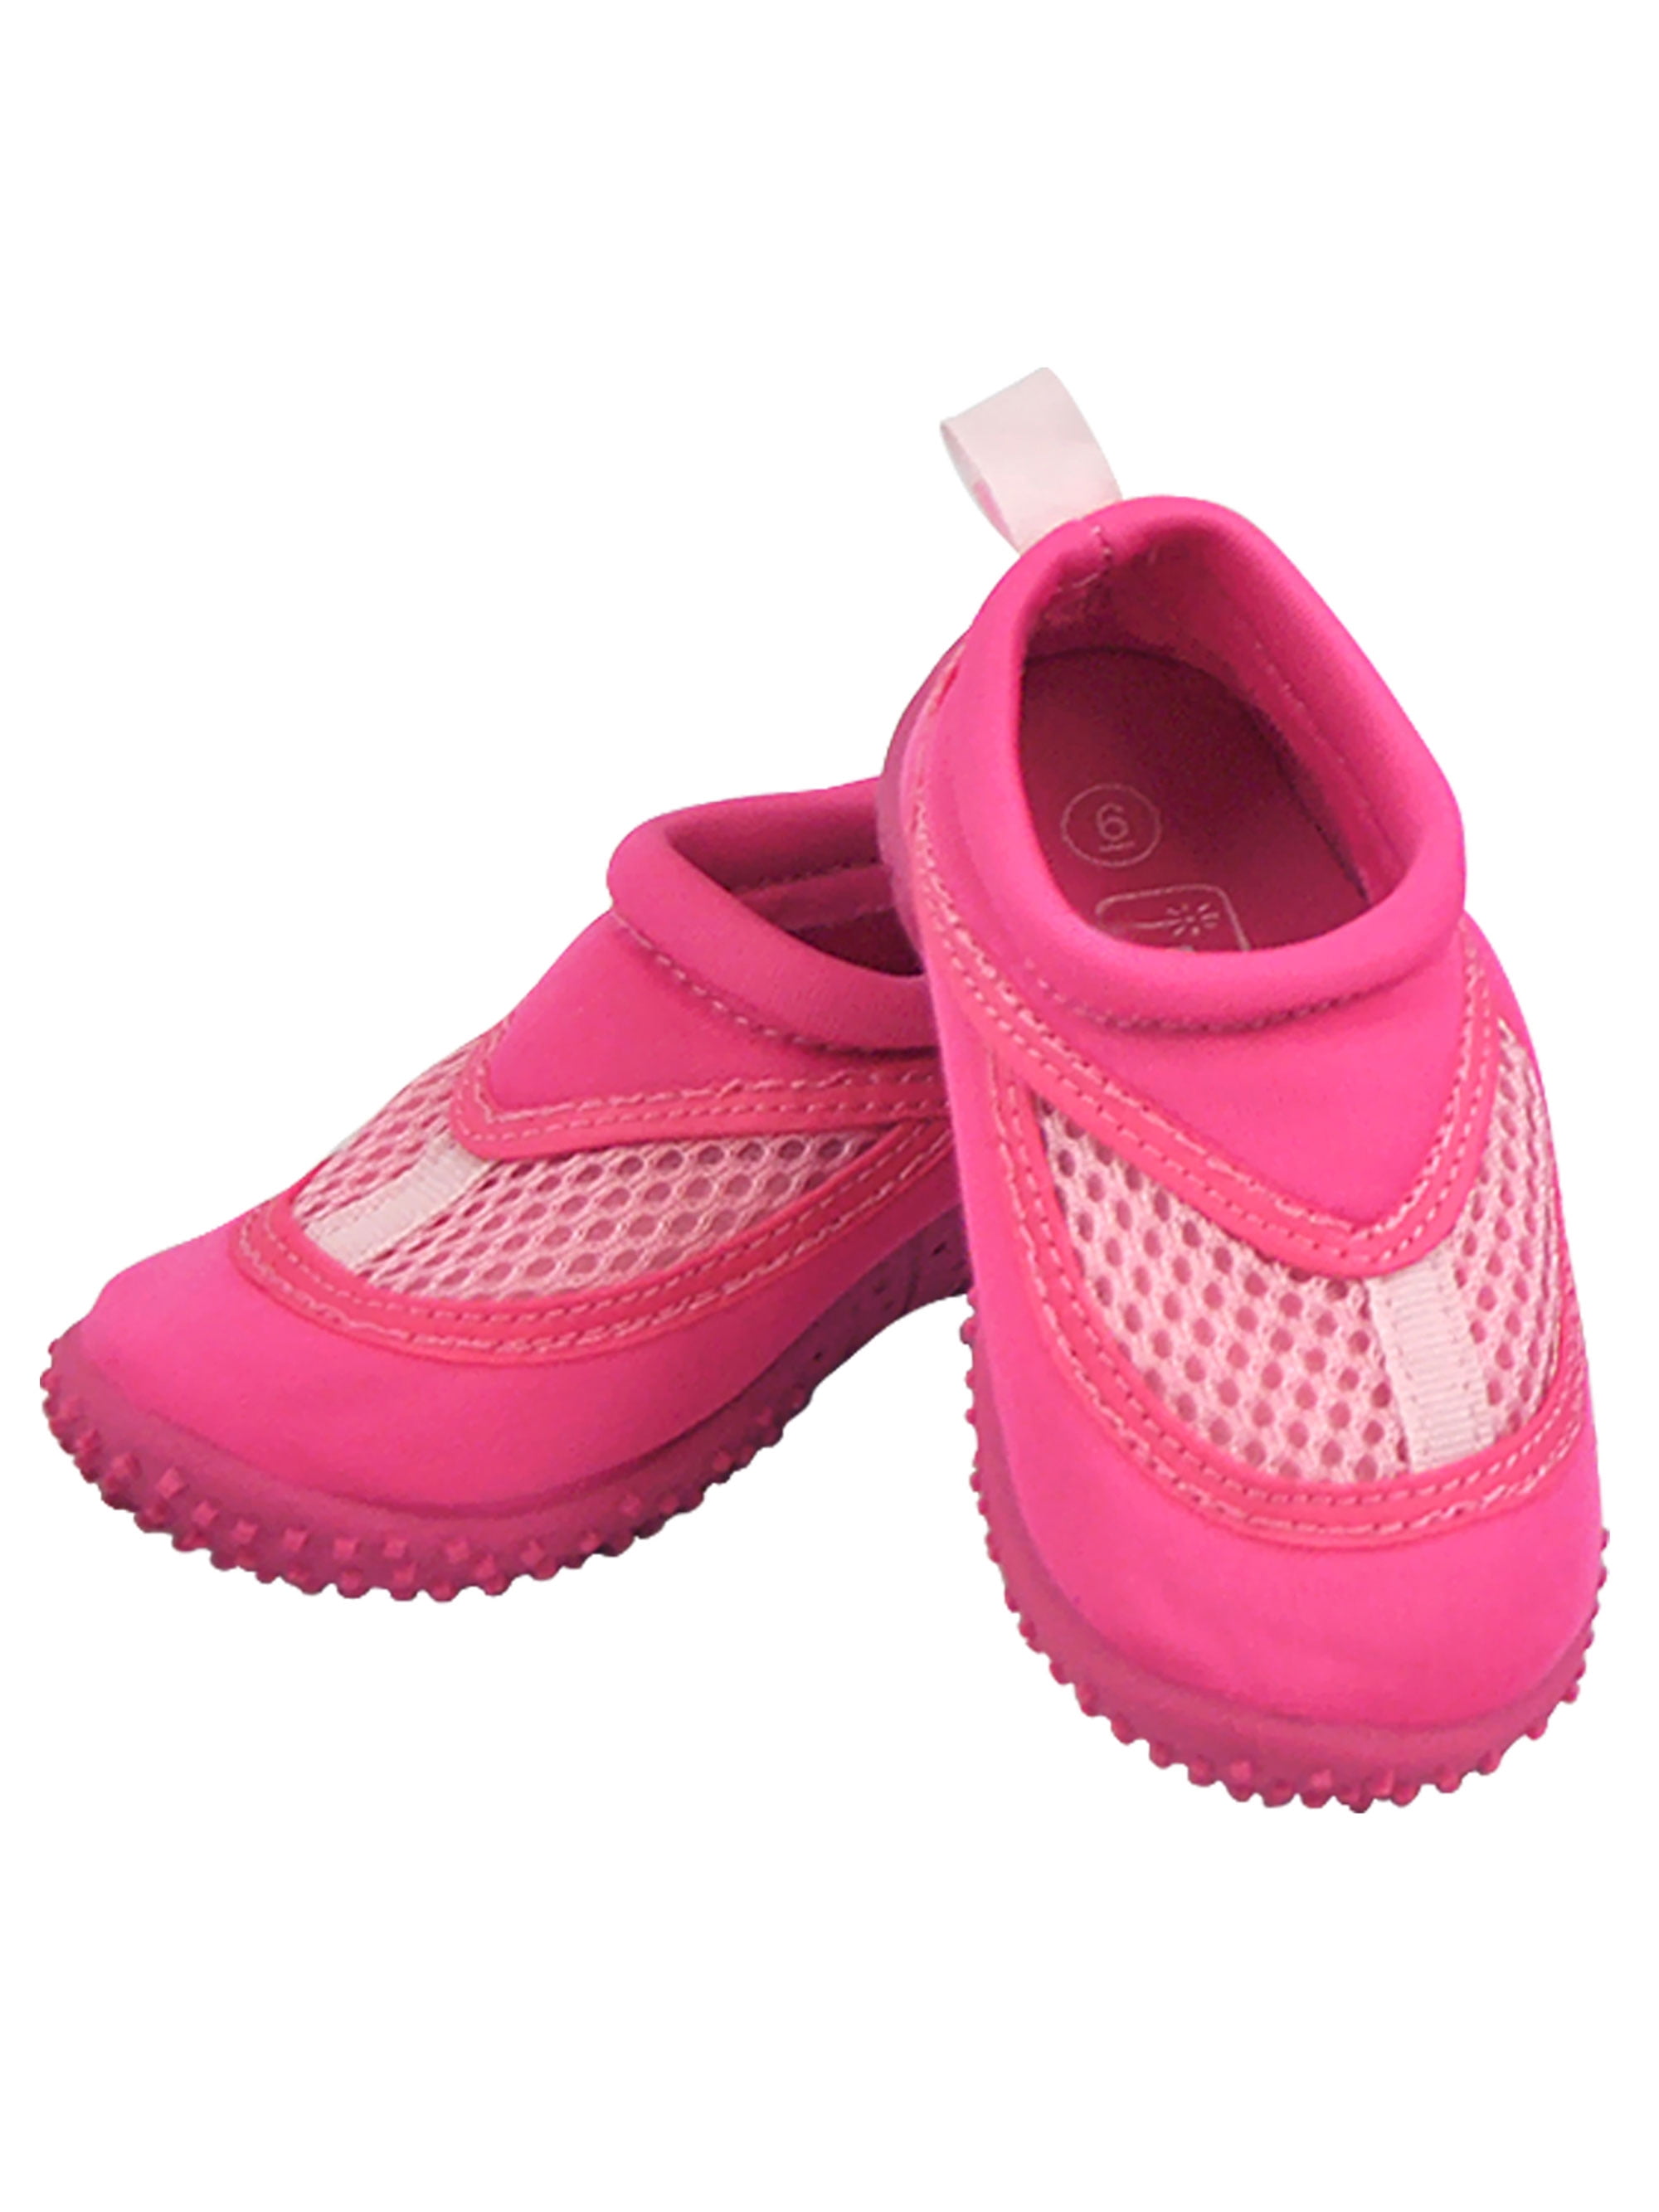 baby water shoes size 4